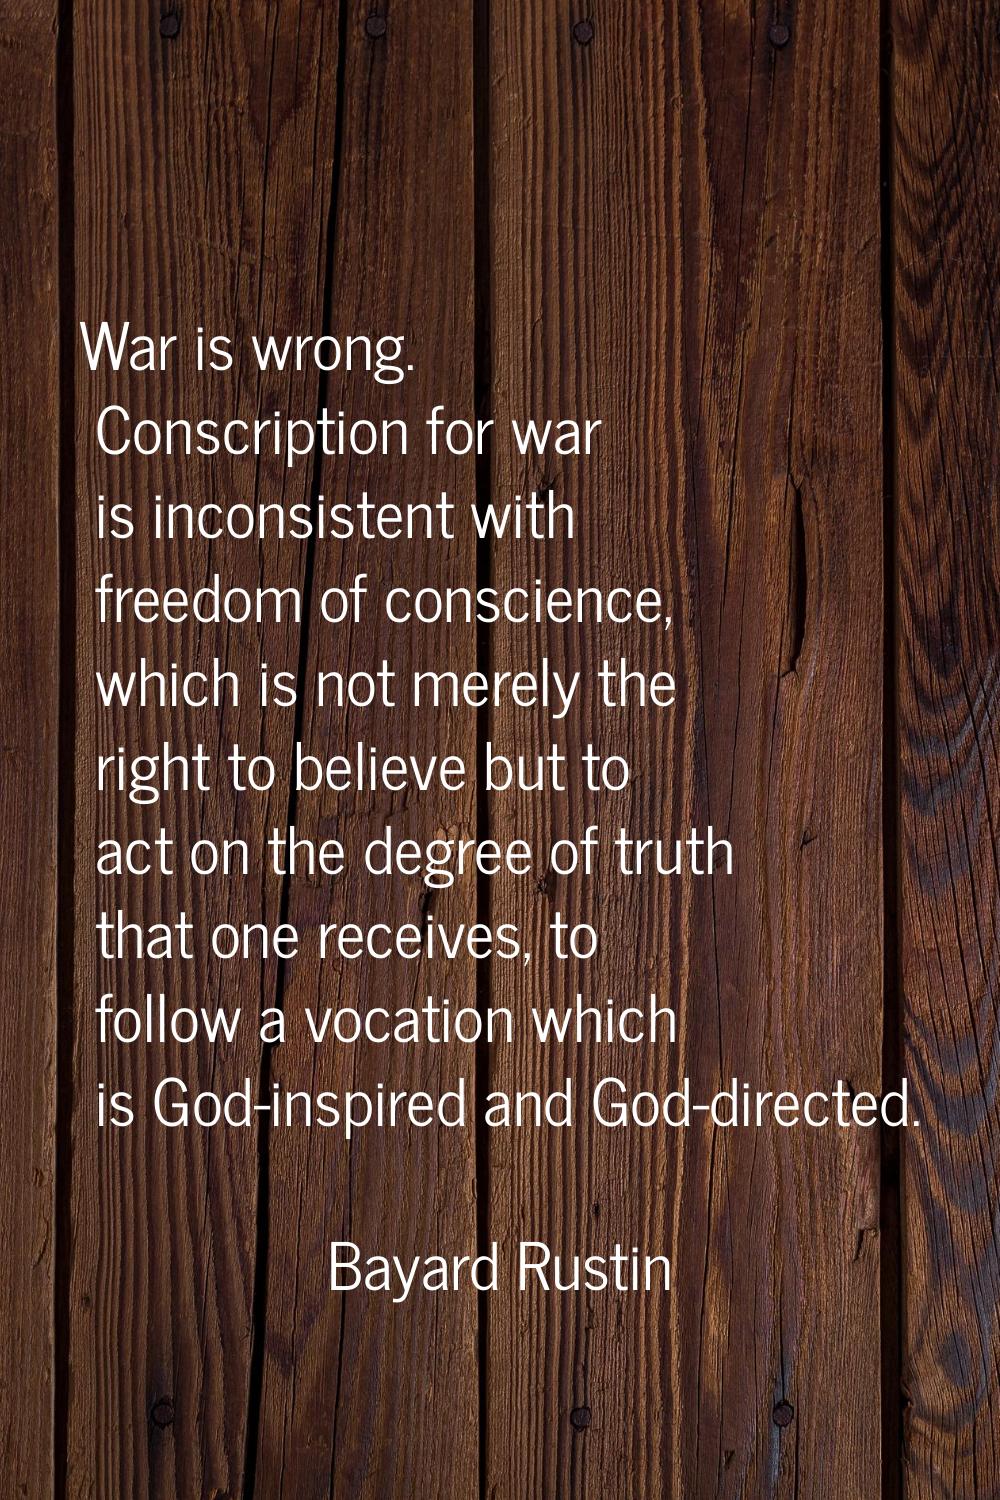 War is wrong. Conscription for war is inconsistent with freedom of conscience, which is not merely 